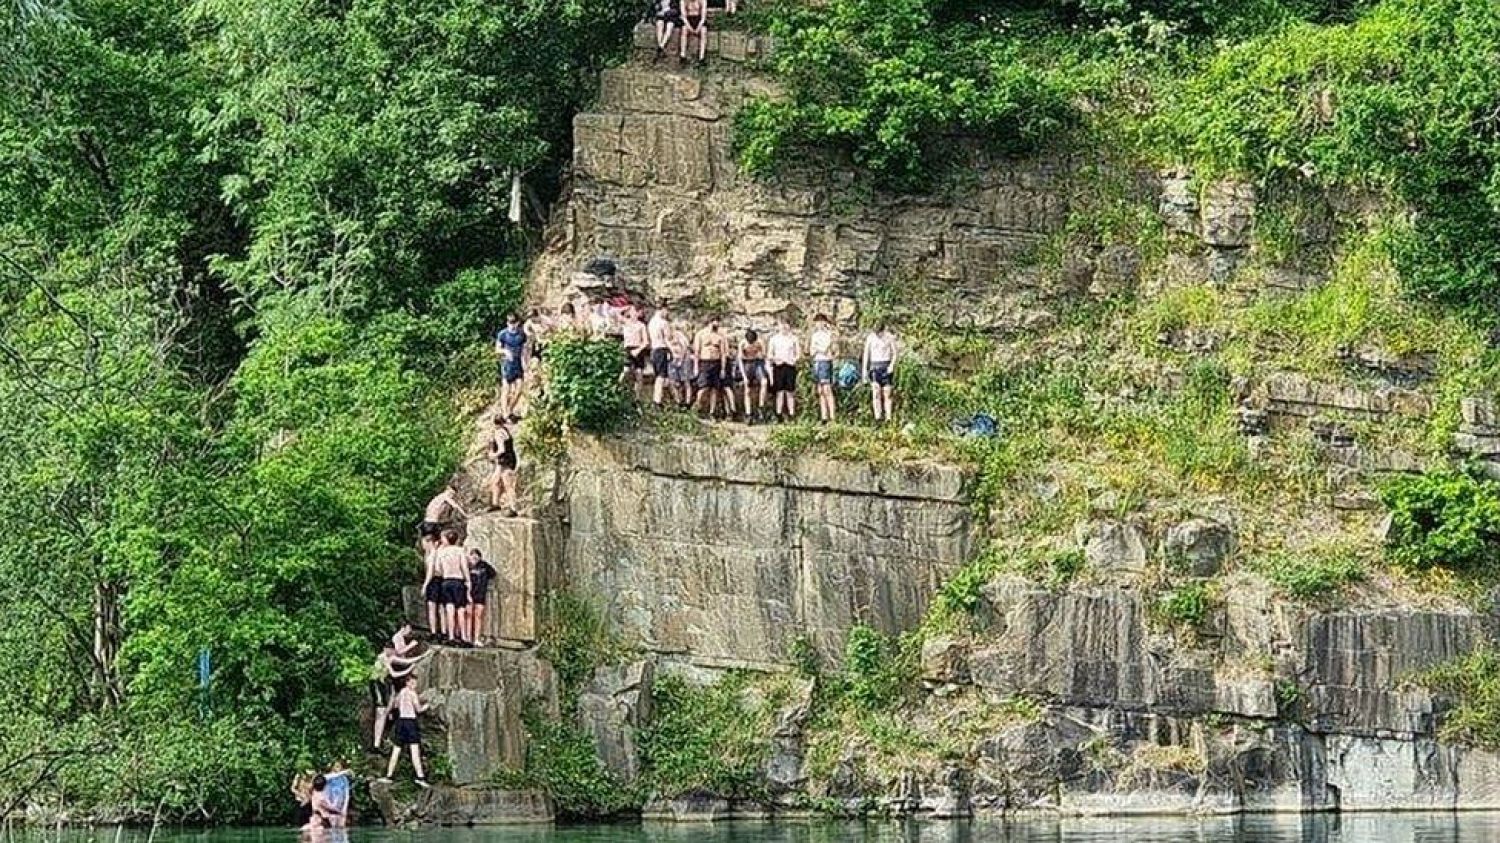 Appley Bridge Quarry Creates Death Trap for Young People